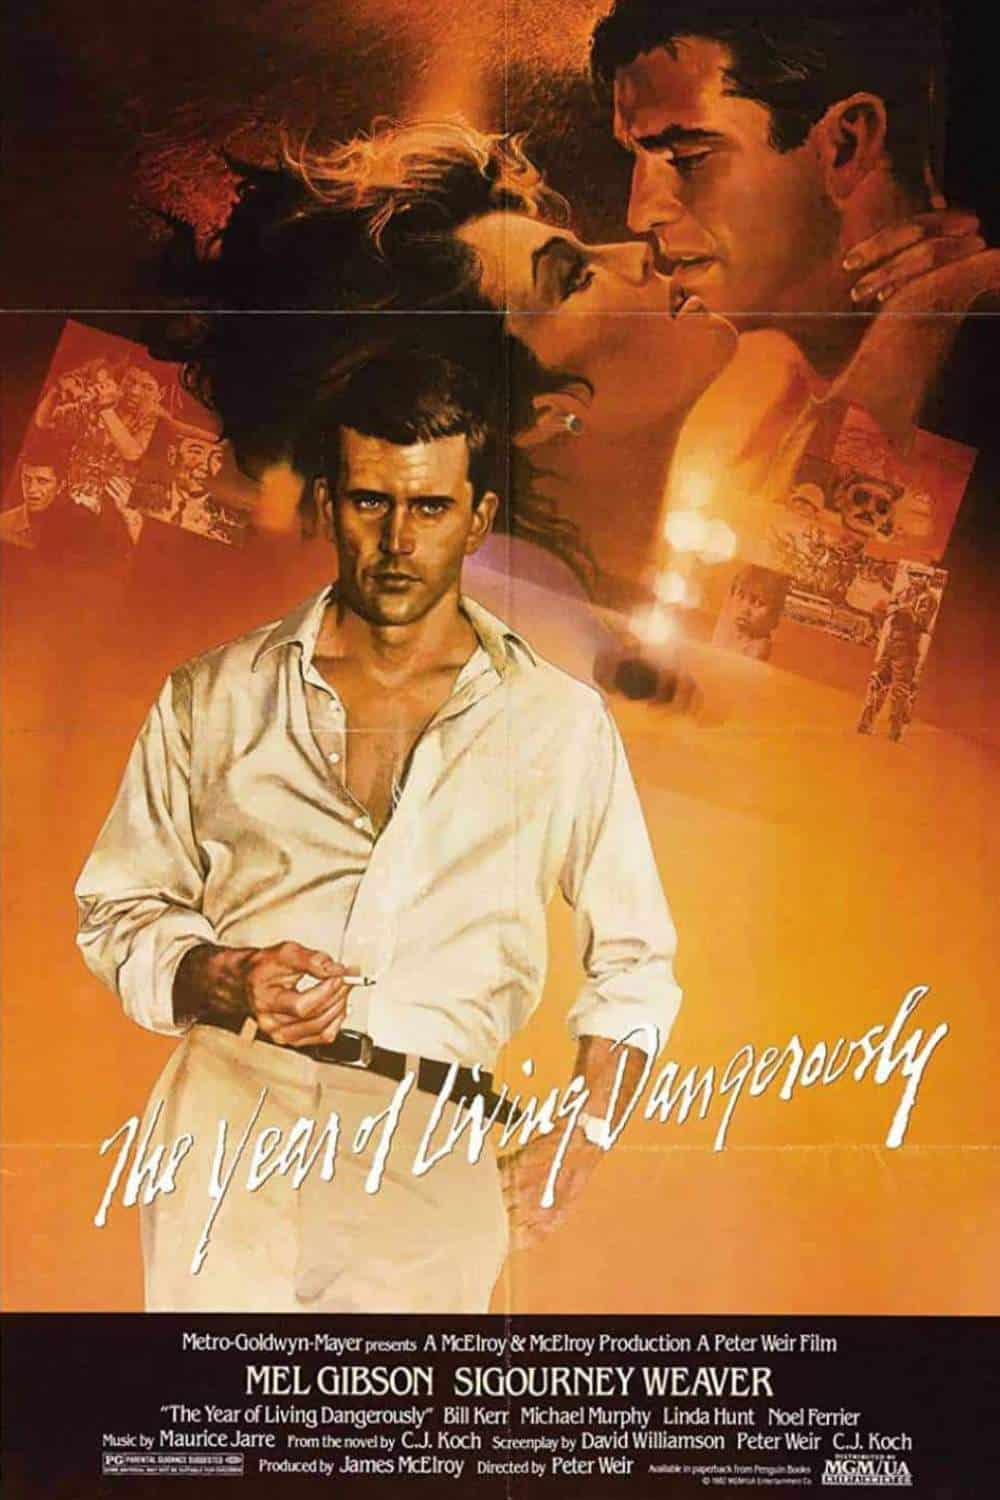 Top 11 Best Movies Starring Mel Gibson (Ranked) The Year of Living Dangerously (1982)